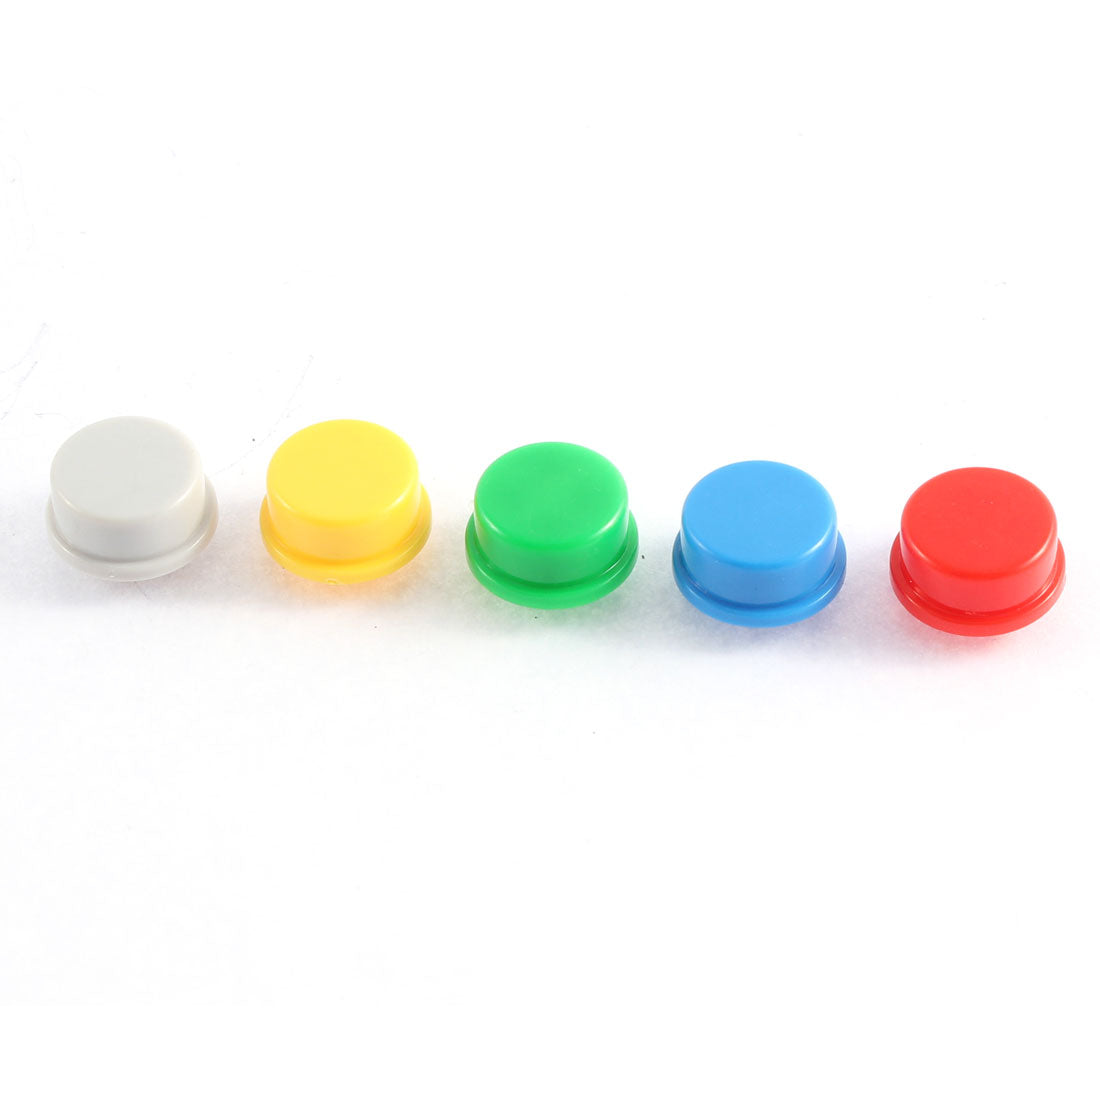 uxcell Uxcell 25PCS 12 x 12mm Tact Tactile Switches Cap Round Pushbutton Cover Assorted Color